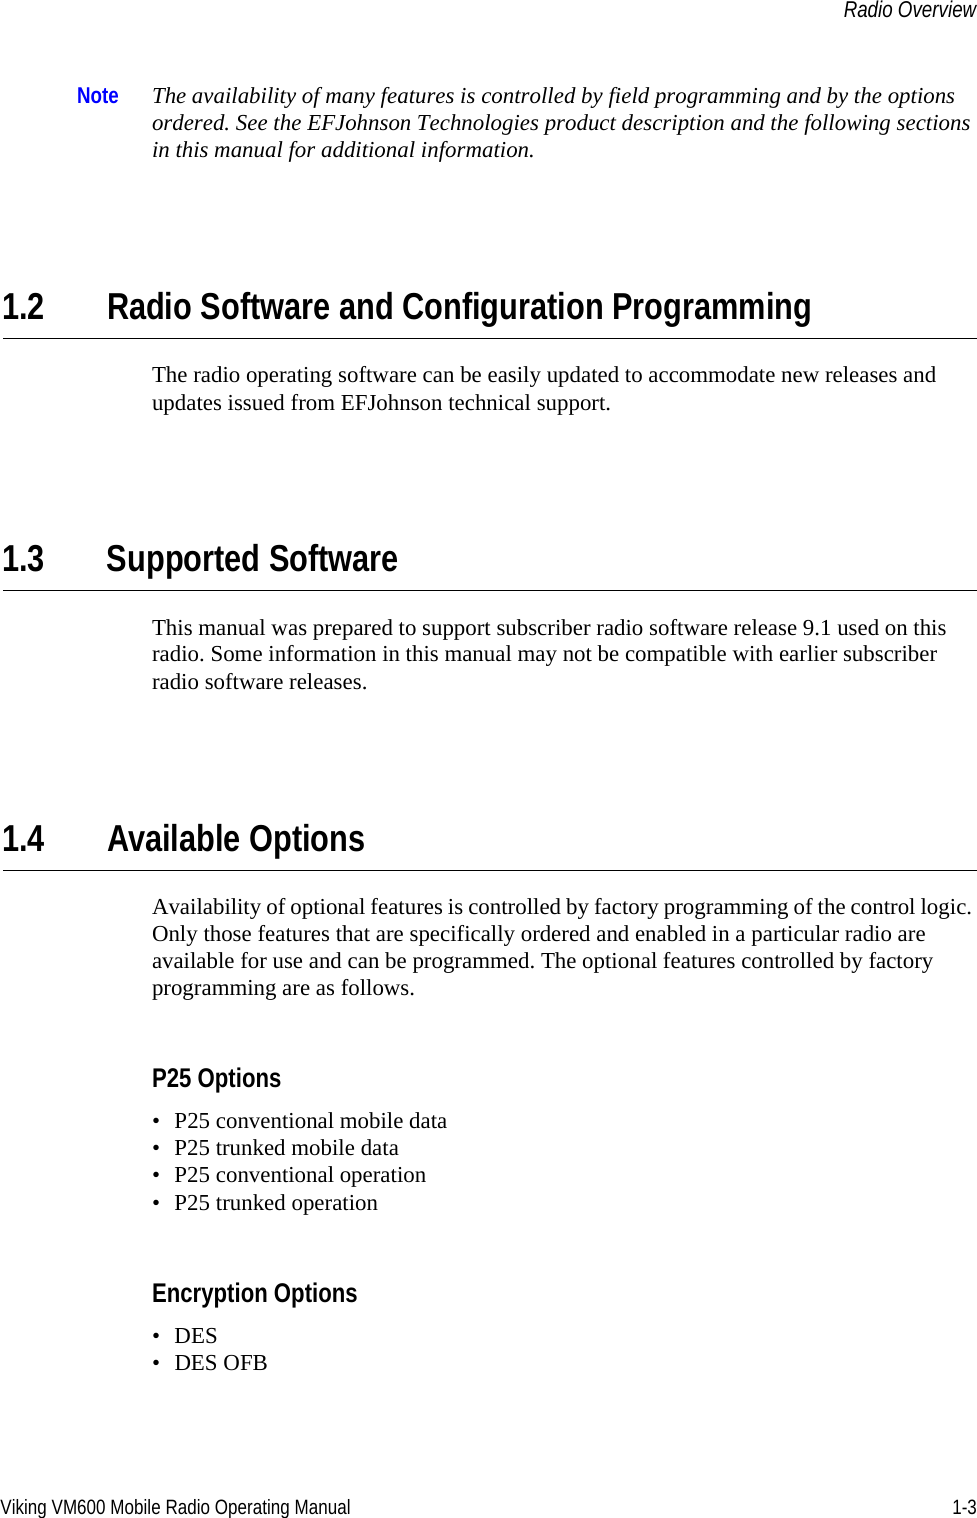 Viking VM600 Mobile Radio Operating Manual 1-3Radio OverviewNote The availability of many features is controlled by field programming and by the options ordered. See the EFJohnson Technologies product description and the following sections in this manual for additional information.1.2 Radio Software and Configuration ProgrammingThe radio operating software can be easily updated to accommodate new releases and updates issued from EFJohnson technical support.1.3 Supported SoftwareThis manual was prepared to support subscriber radio software release 9.1 used on this radio. Some information in this manual may not be compatible with earlier subscriber radio software releases.1.4 Available OptionsAvailability of optional features is controlled by factory programming of the control logic. Only those features that are specifically ordered and enabled in a particular radio are available for use and can be programmed. The optional features controlled by factory programming are as follows.P25 Options• P25 conventional mobile data• P25 trunked mobile data• P25 conventional operation• P25 trunked operationEncryption Options•DES• DES OFBDraft 4/29/2014